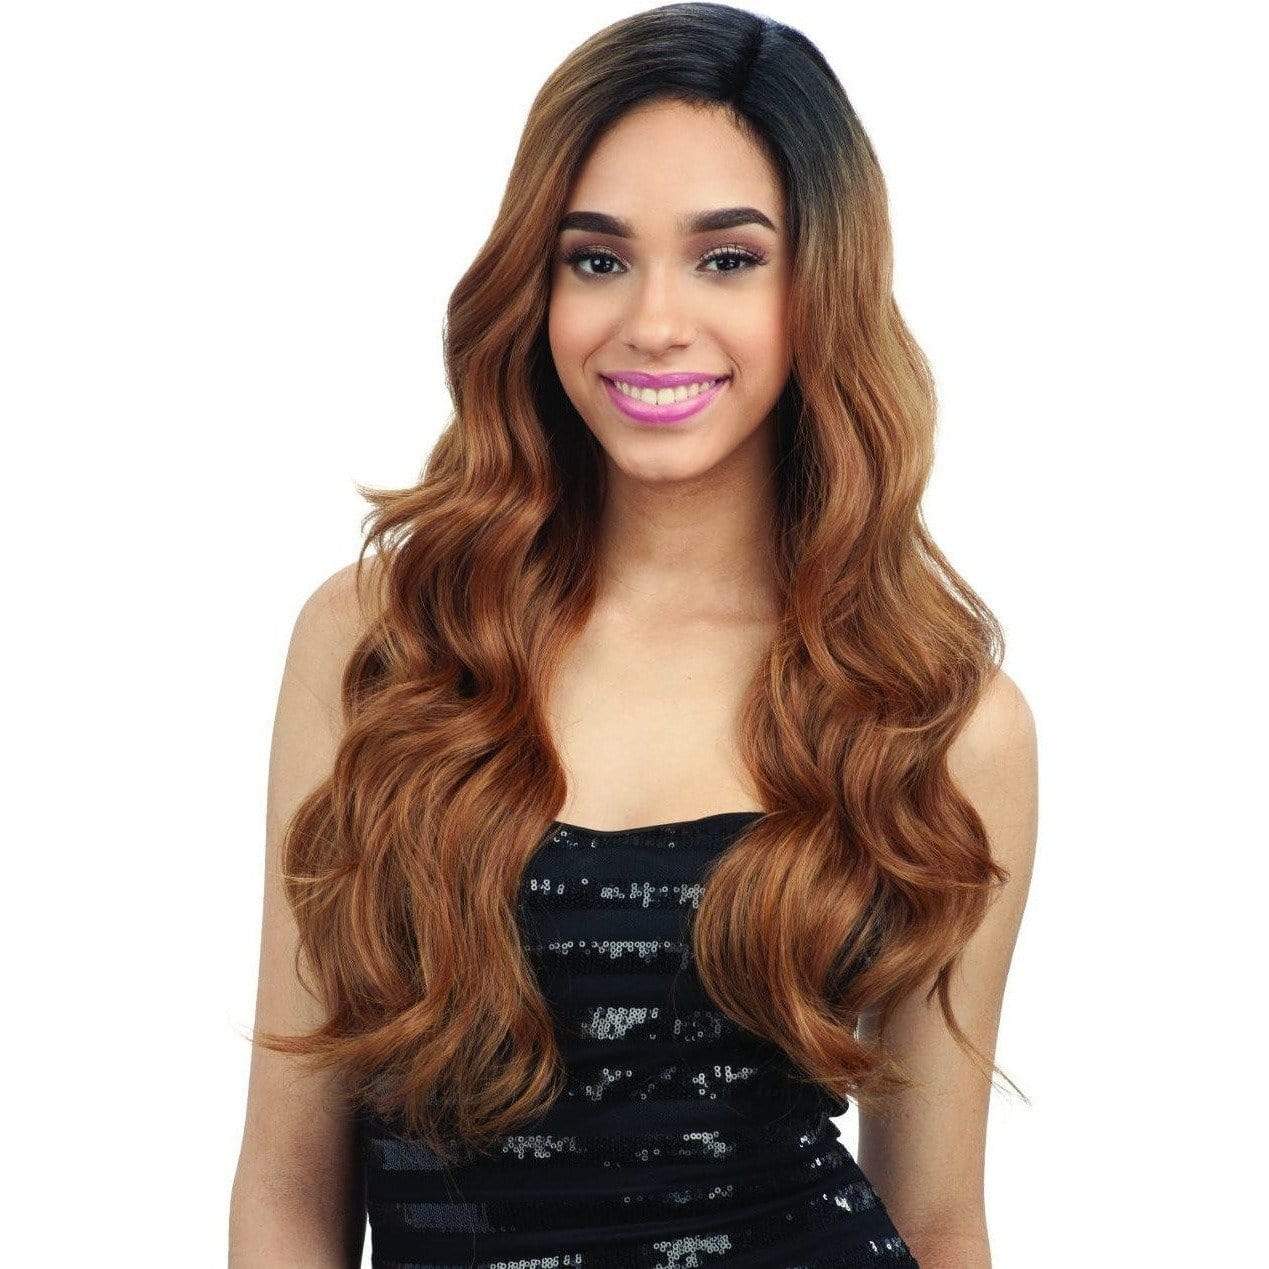 Freetress Equal Synthetic Lace Front Wig - Freedom Part 202